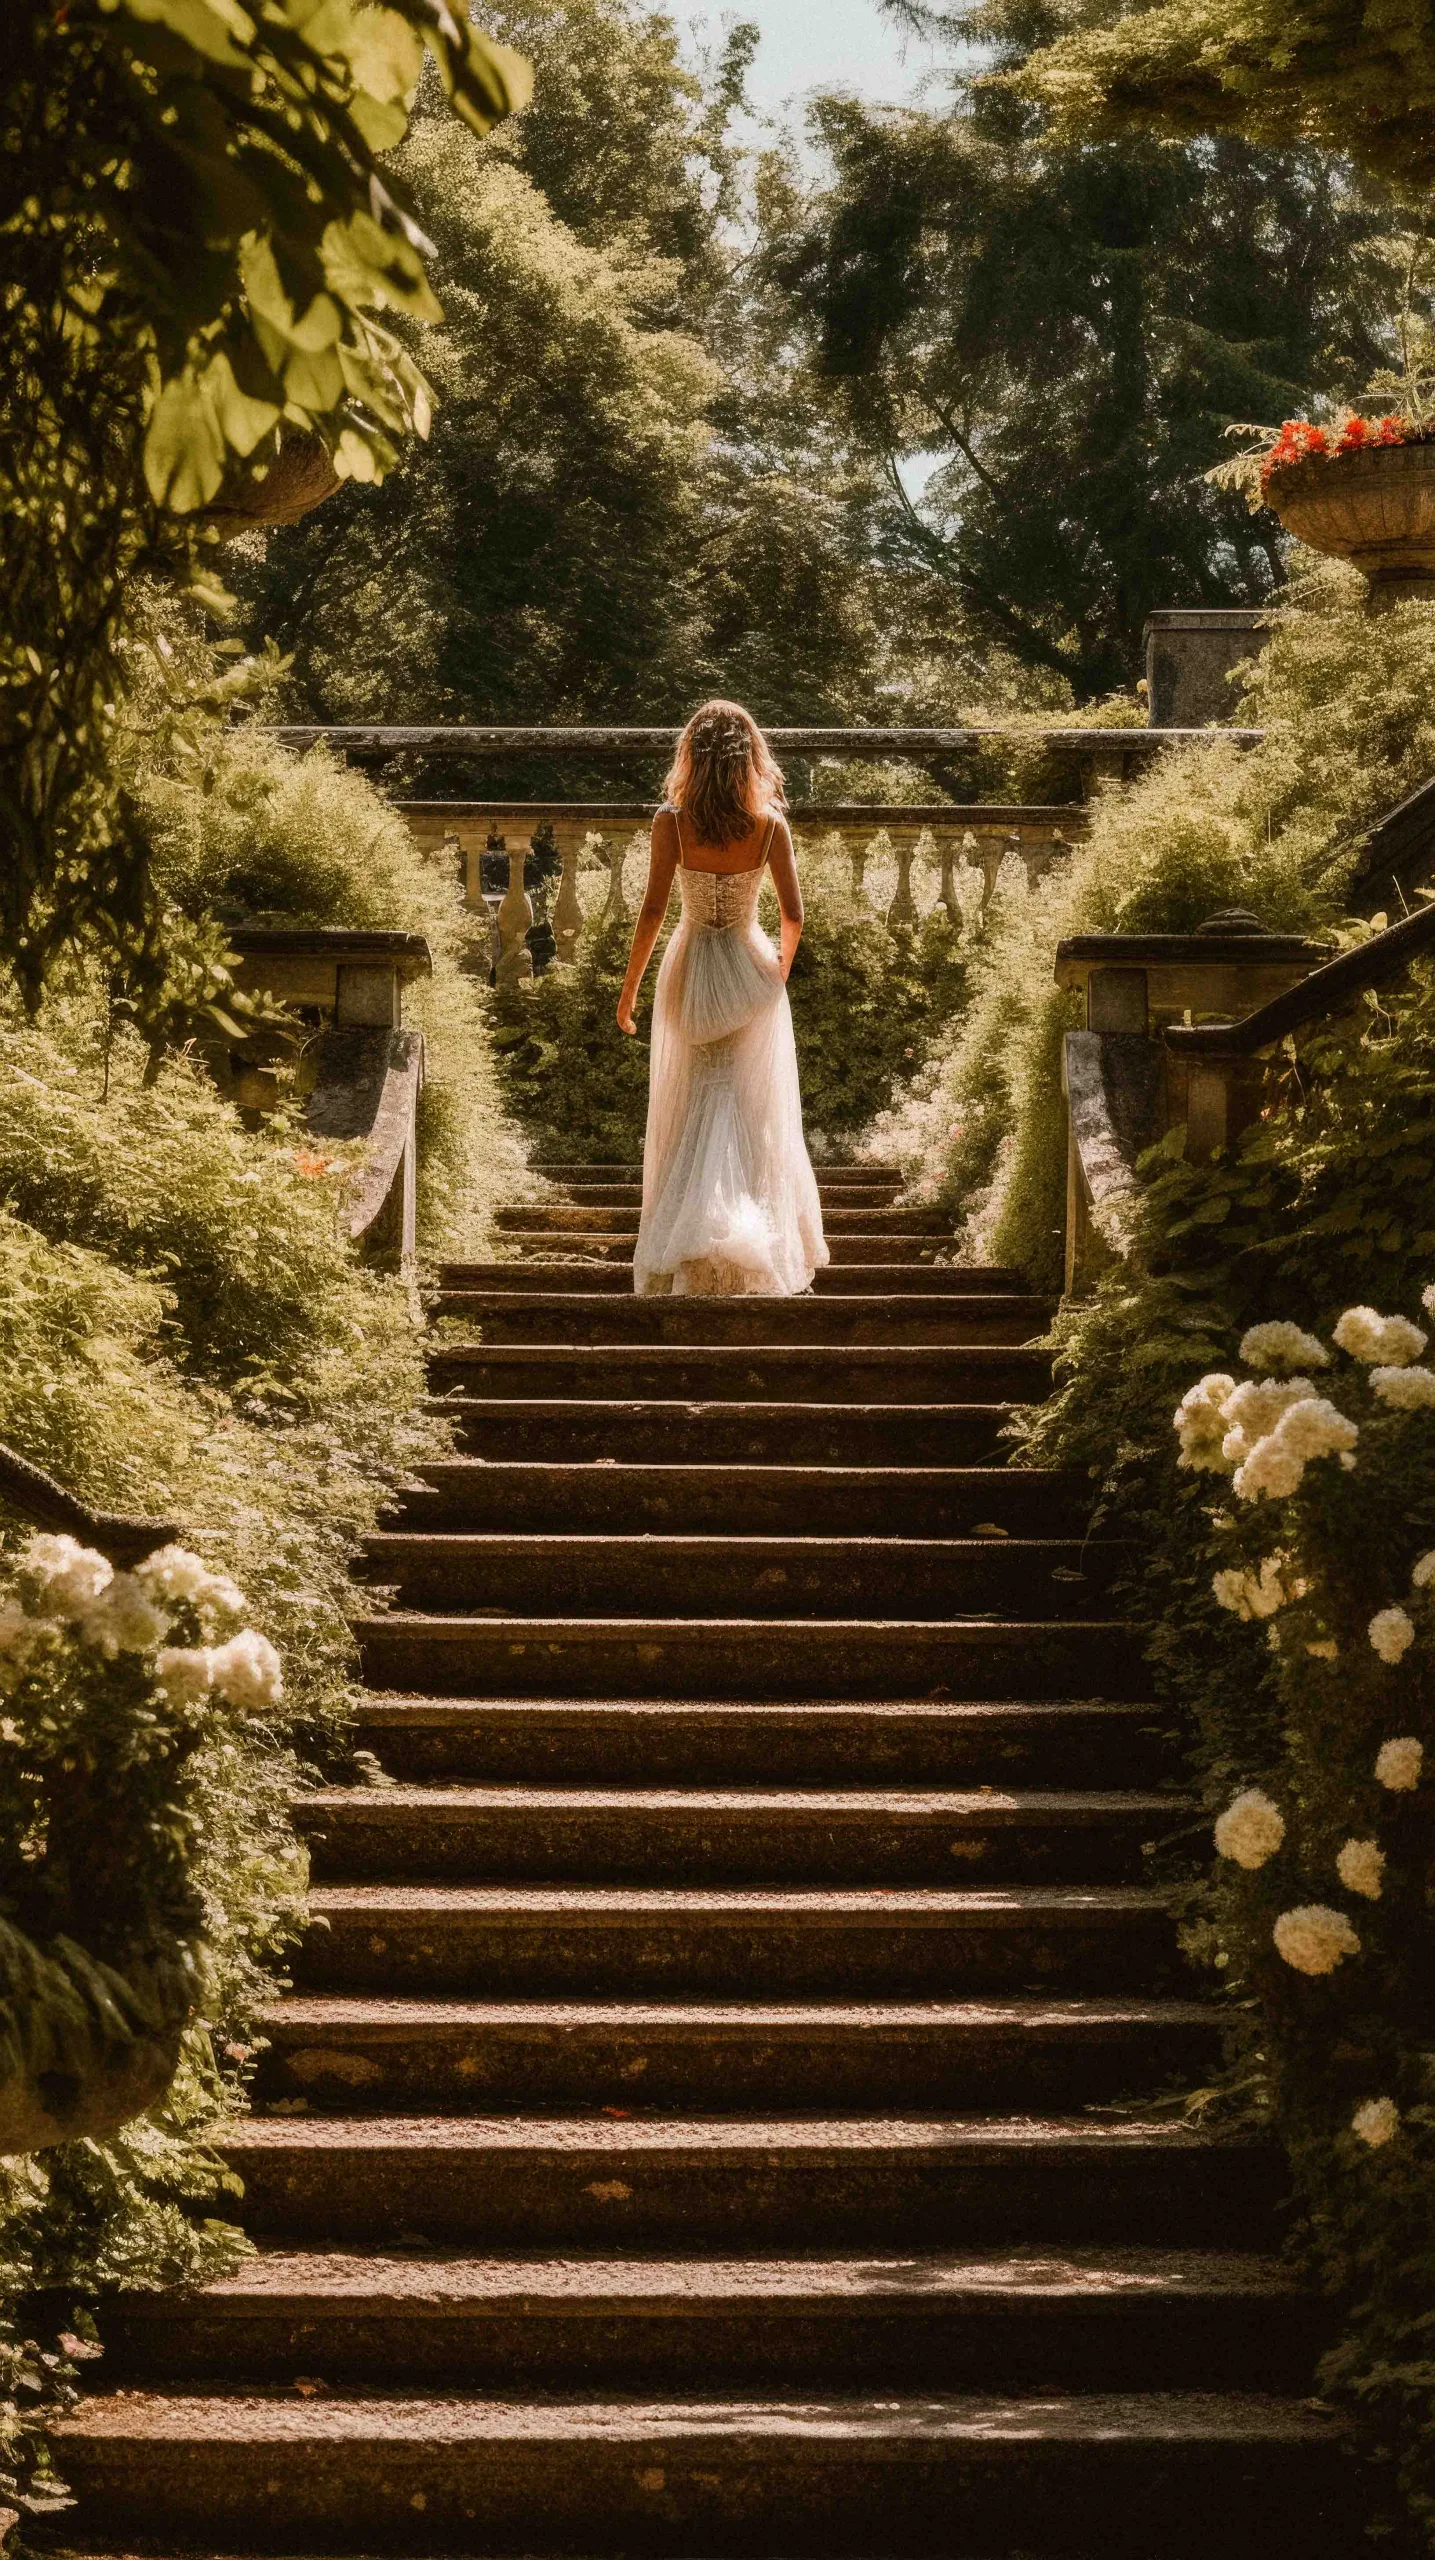 Posing a Bride: woman in a white dress walking down a set of stairs.